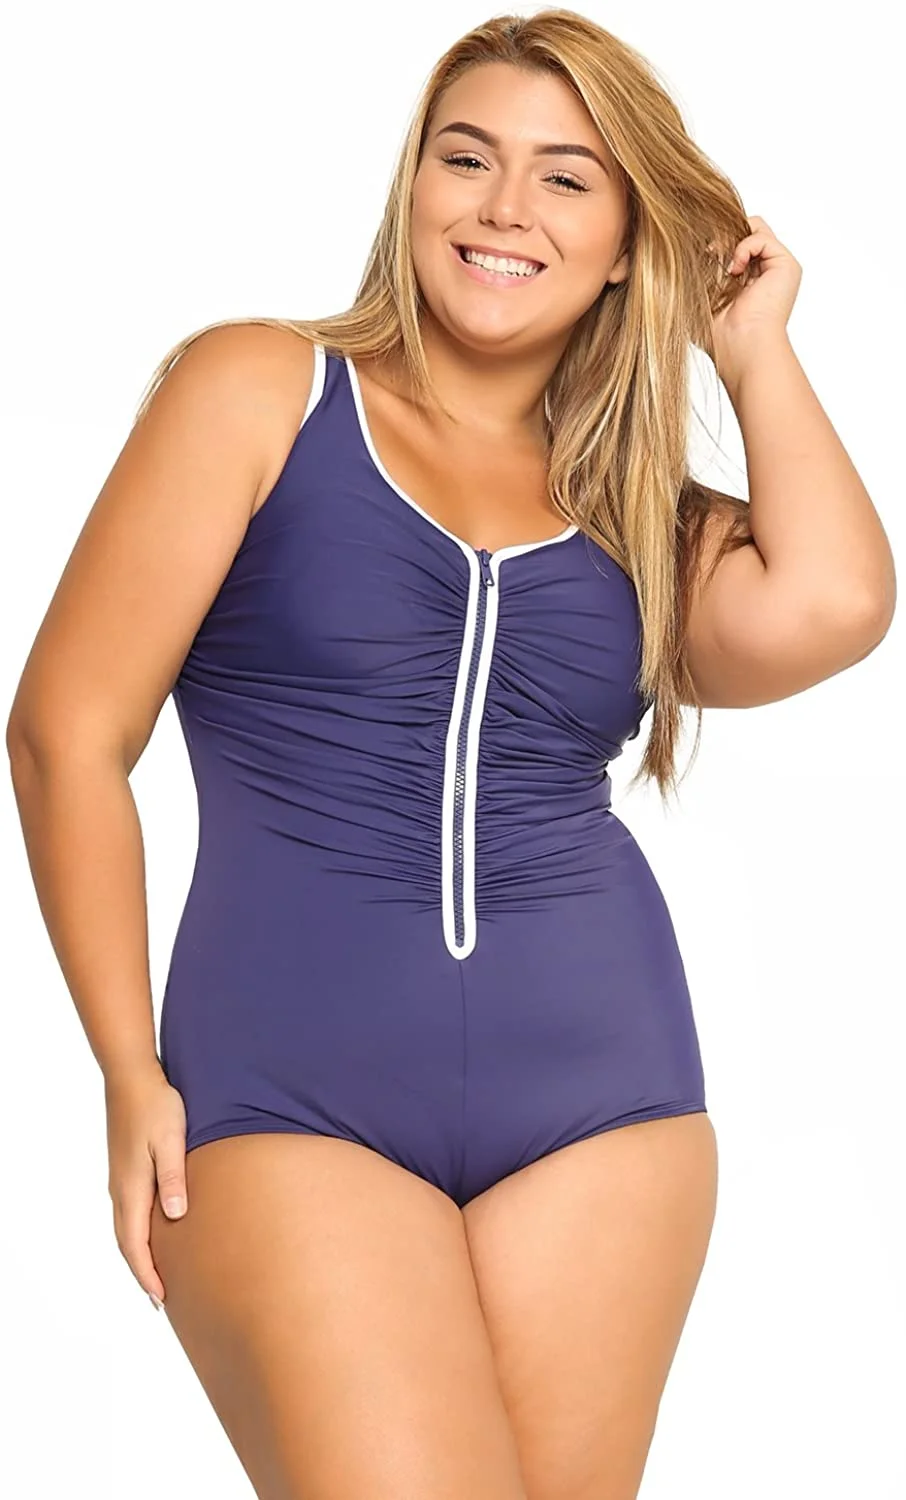 Women's Built-in Cup Plus Size Swimsuits One Piece Zip Front Bathing Suits